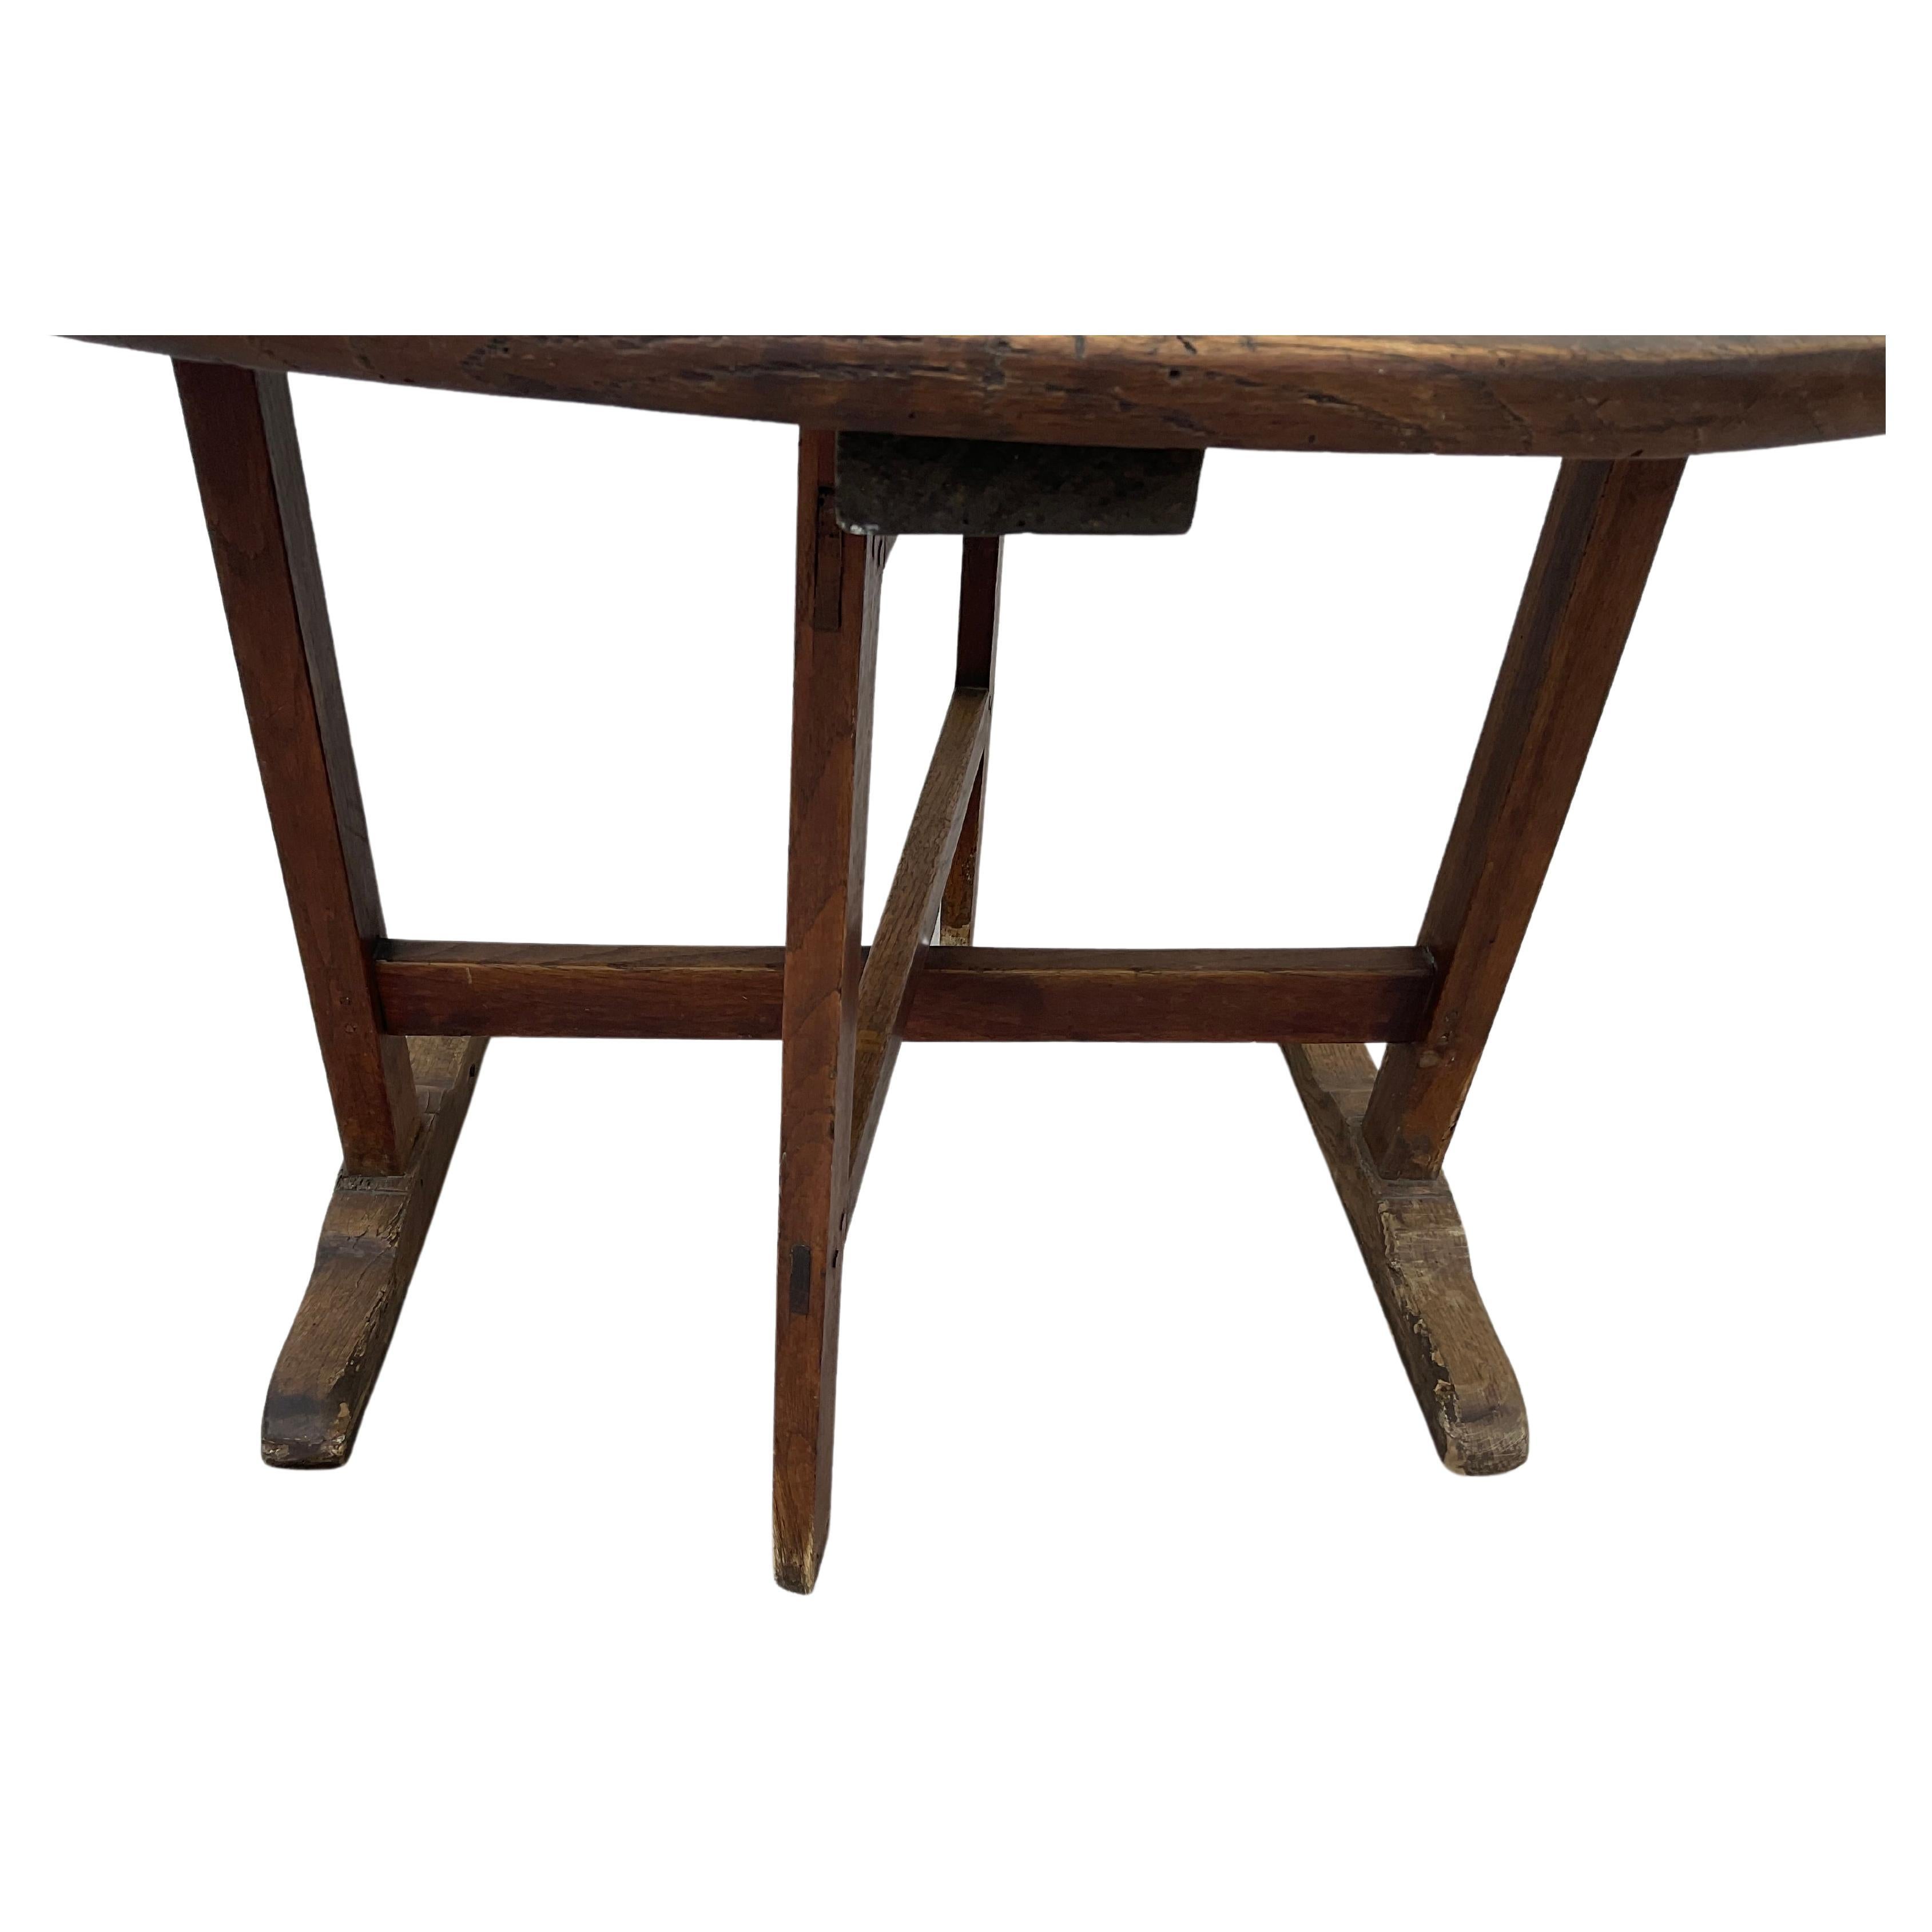 Unique 19th century French tilt-top wooden wine tasting table (“table de vendange”). These tables were commonly used in vineyards of France during the grape harvest season.  Versatile table can be  opened as a 38” round dining or side table, or